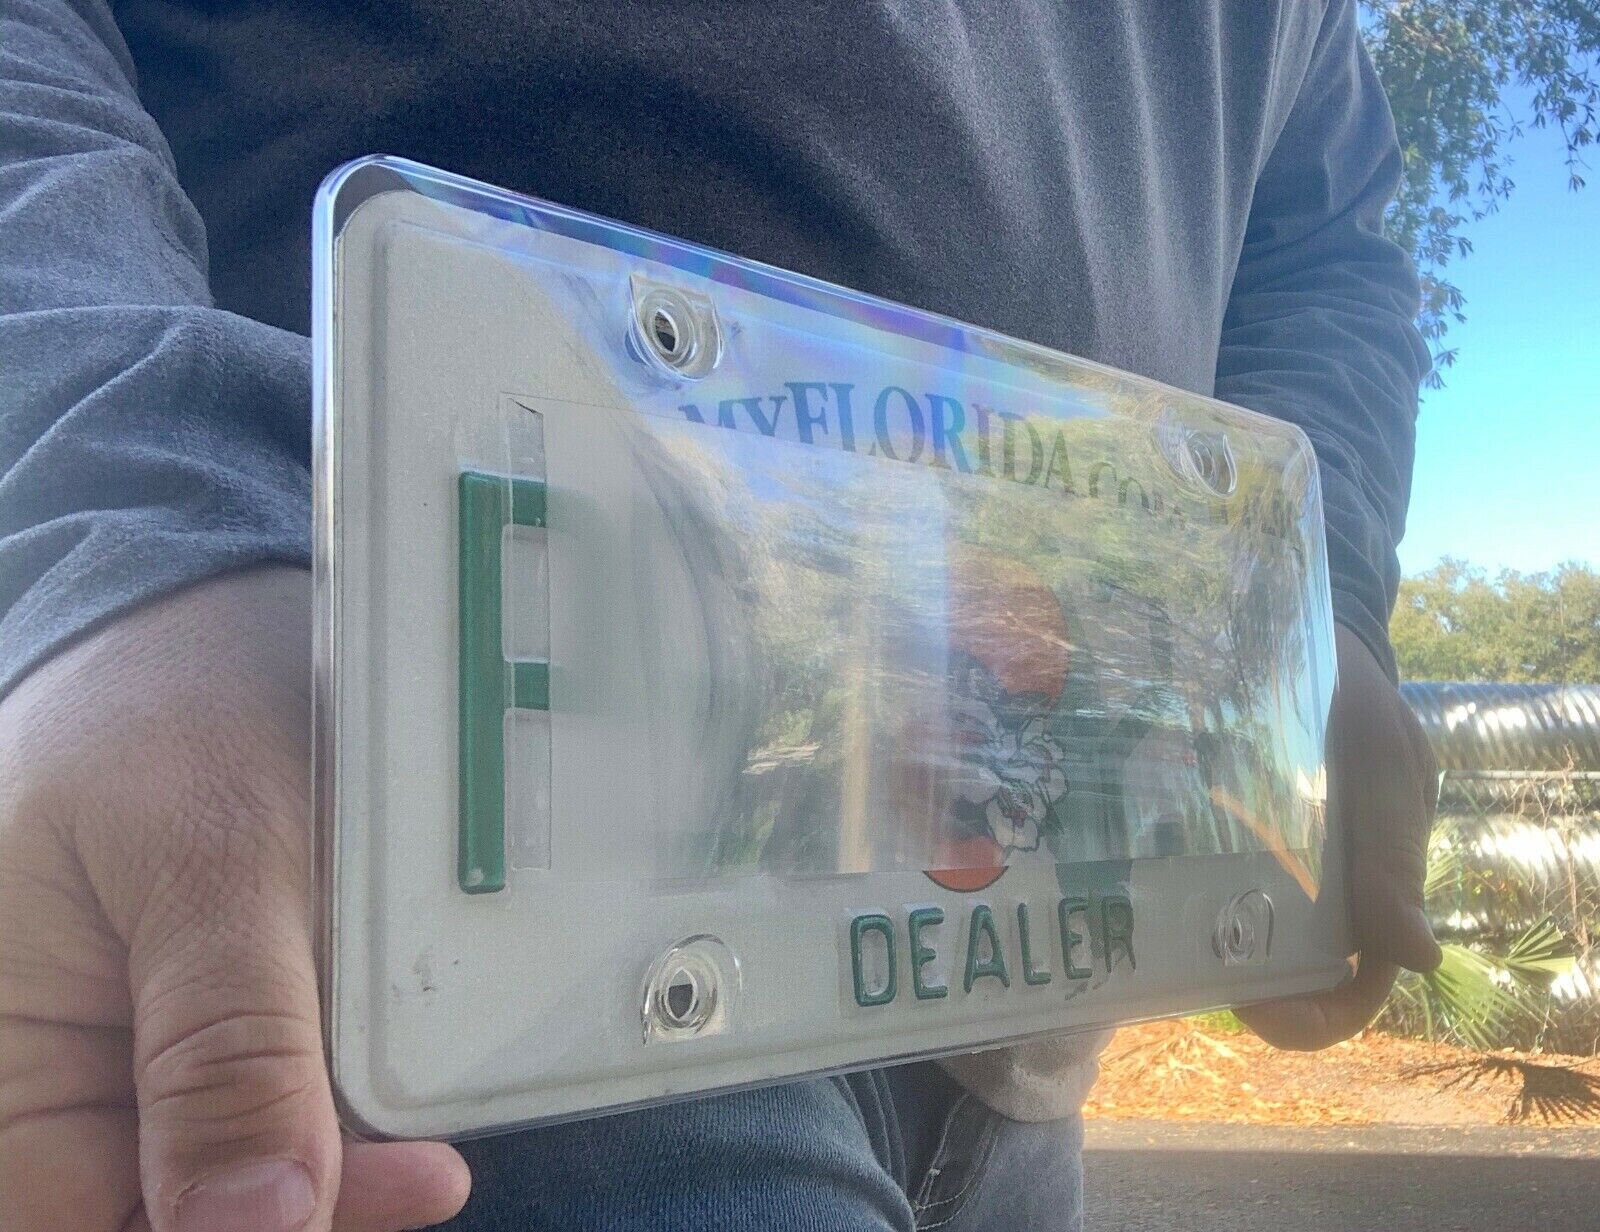 Clear Lens License Plate Cover against Red Light / Speed Photo Camera Blocker Protector - Click Image to Close